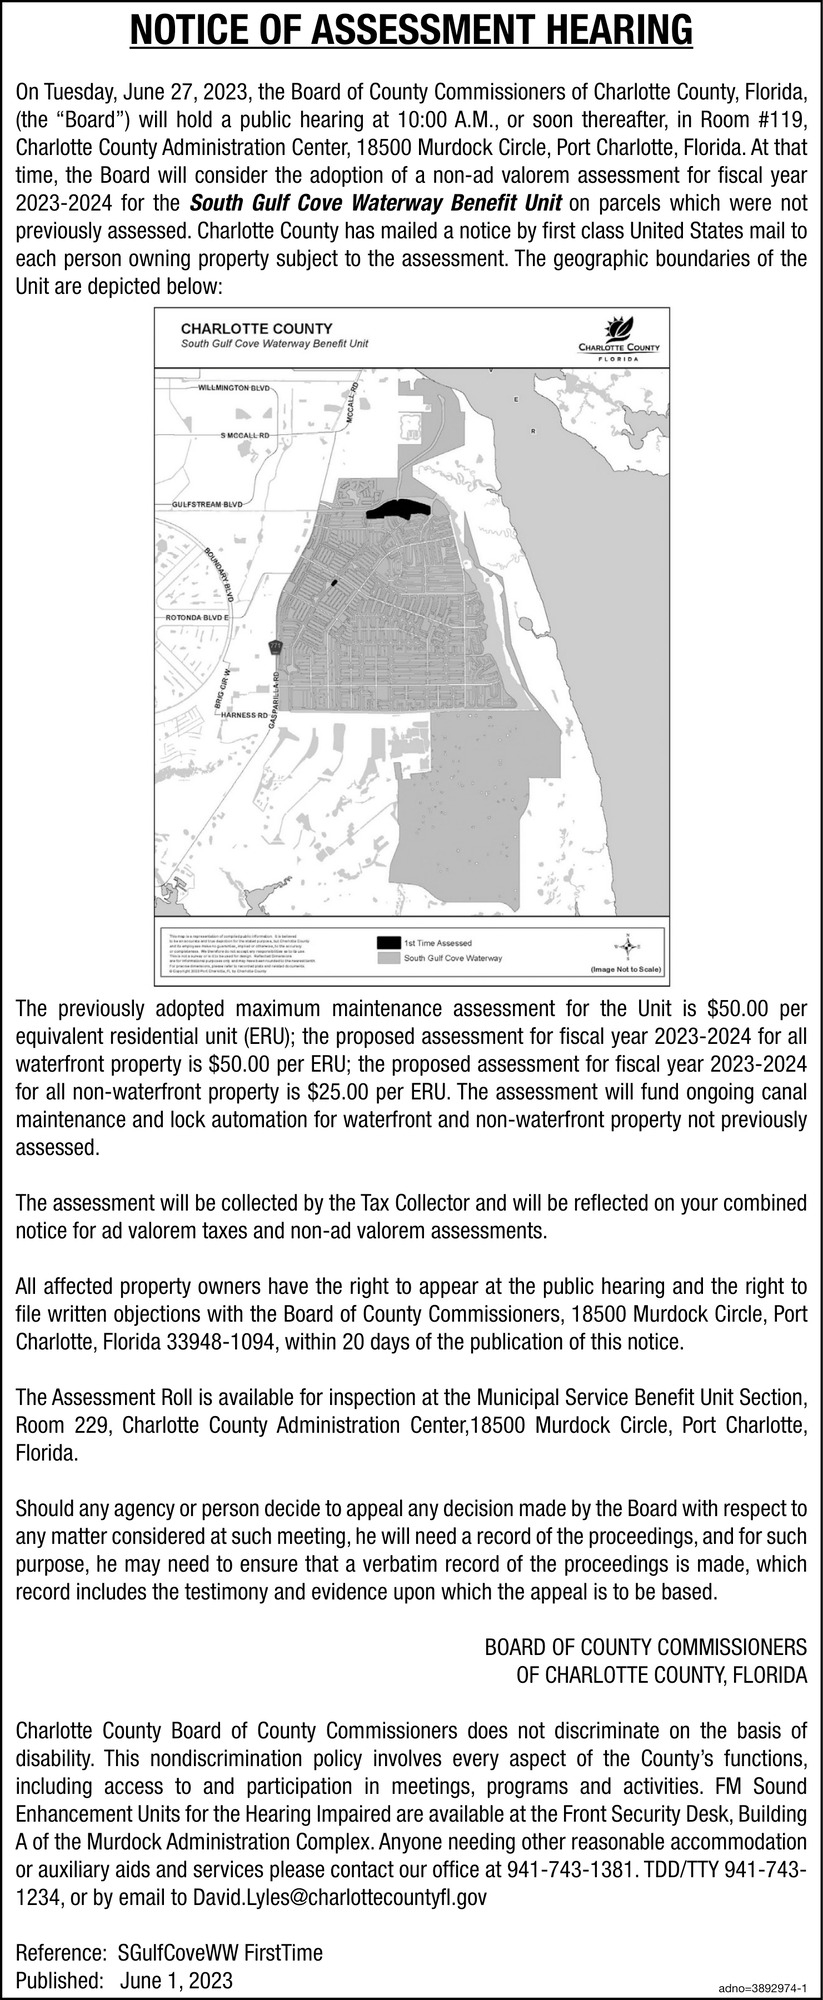 Notice of Assessment Hearing, Charlotte County Board Of County